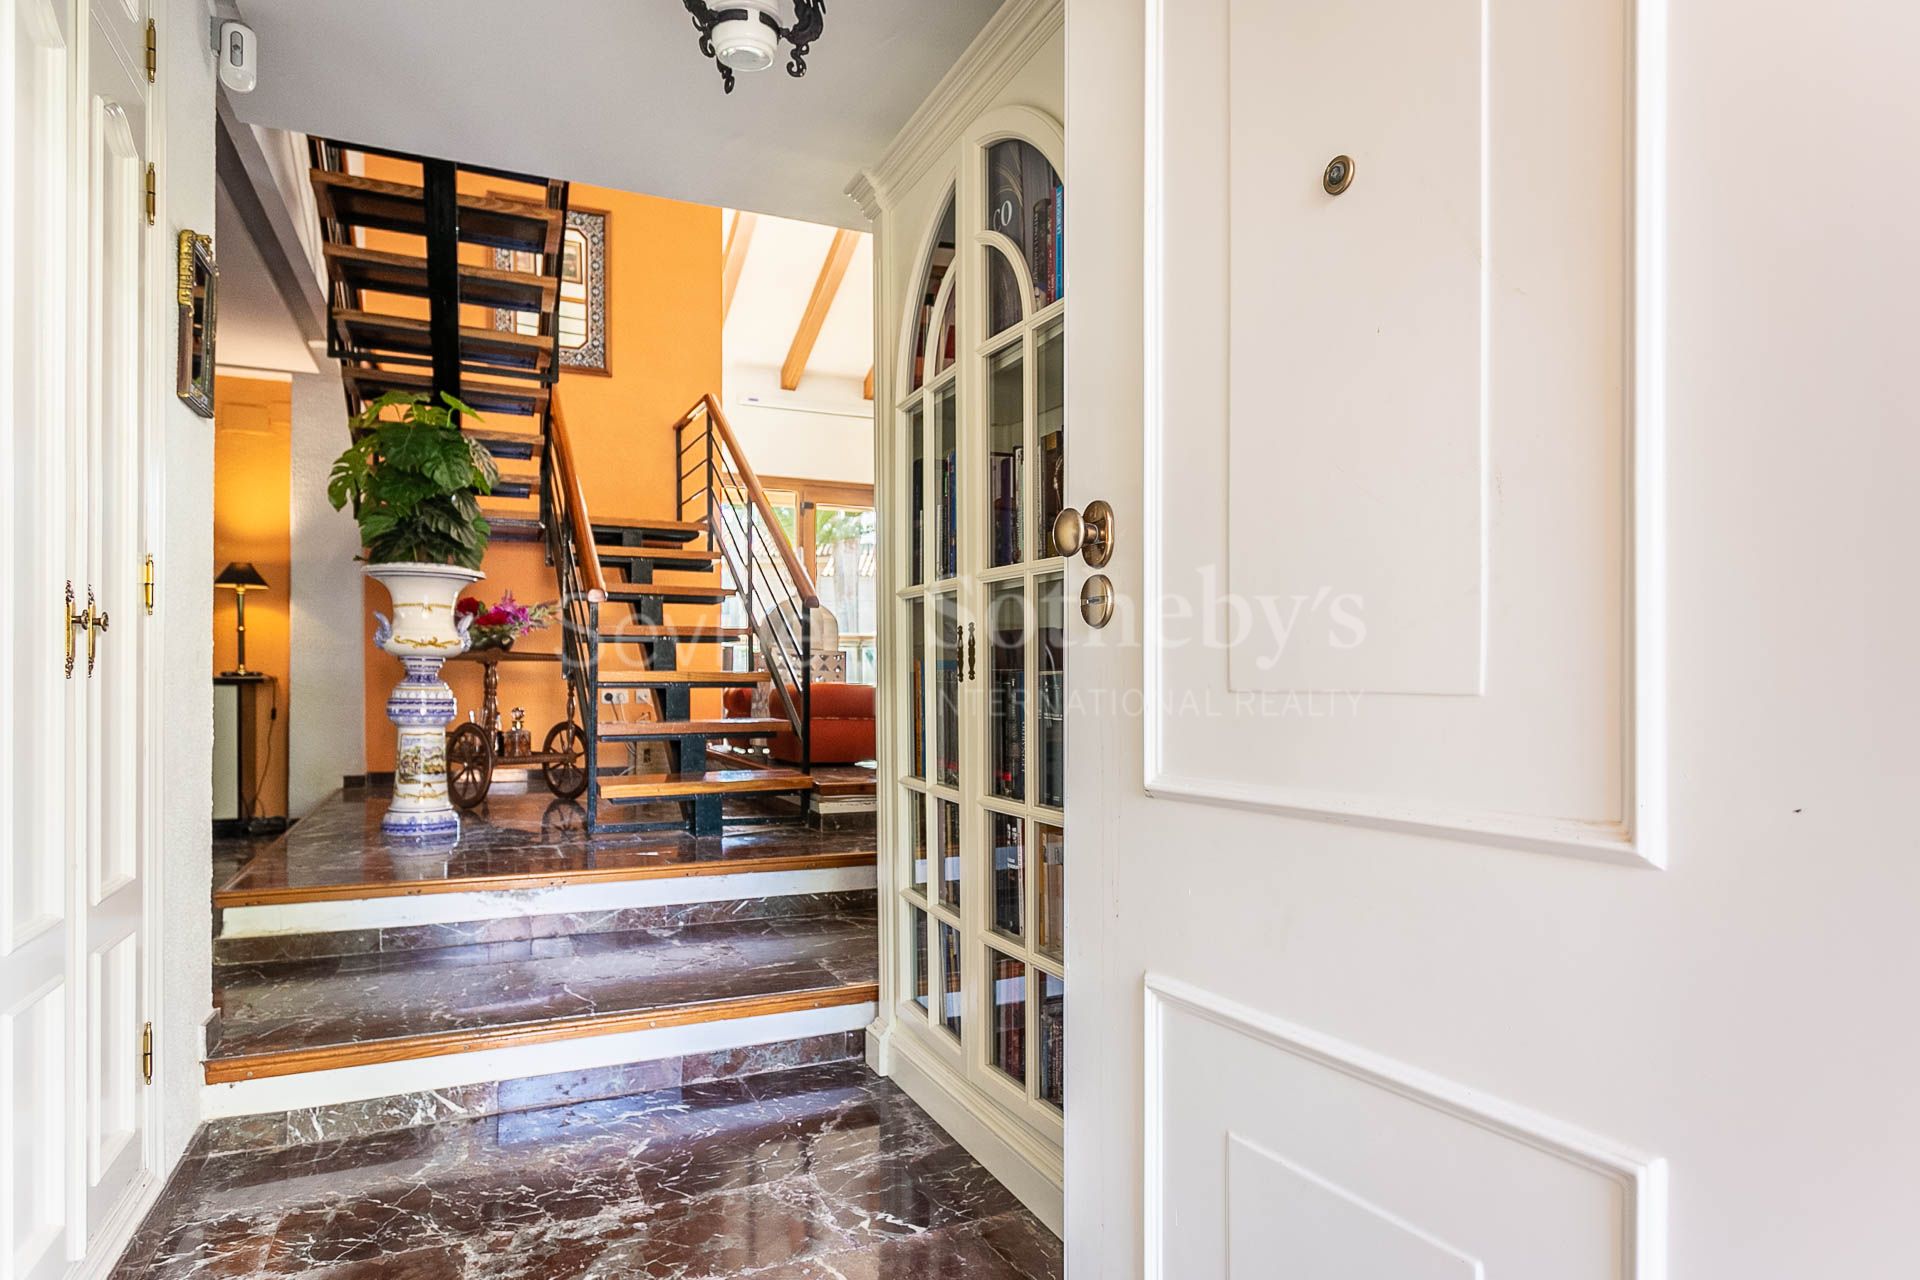 Detached villa located in the urbanization of Torrequinto.